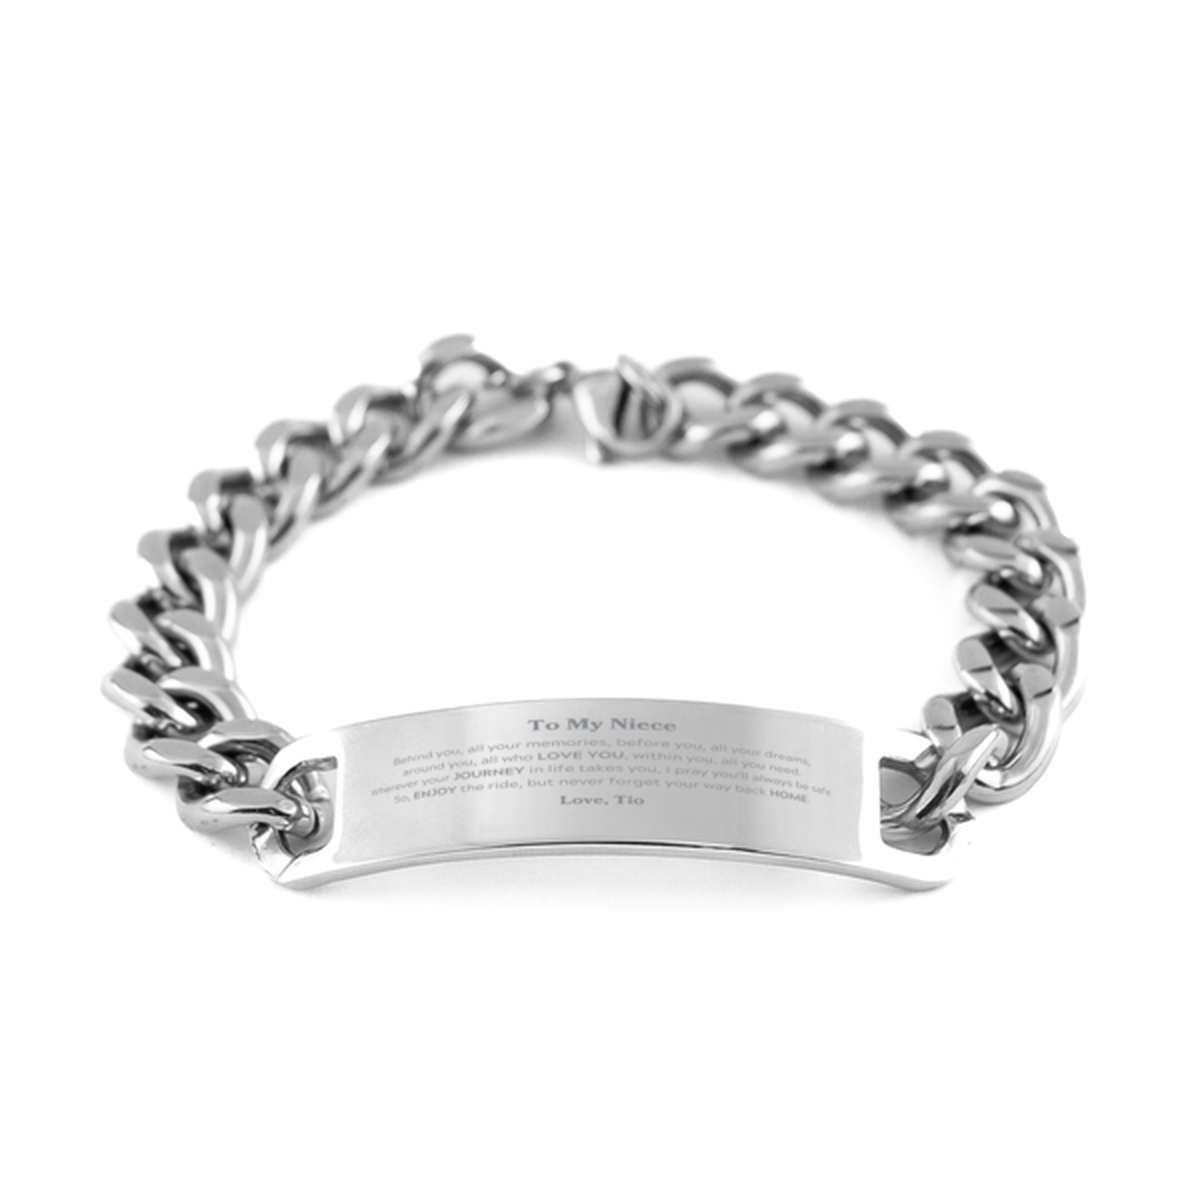 To My Niece Graduation Gifts from Tio, Niece Cuban Chain Stainless Steel Bracelet Christmas Birthday Gifts for Niece Behind you, all your memories, before you, all your dreams. Love, Tio